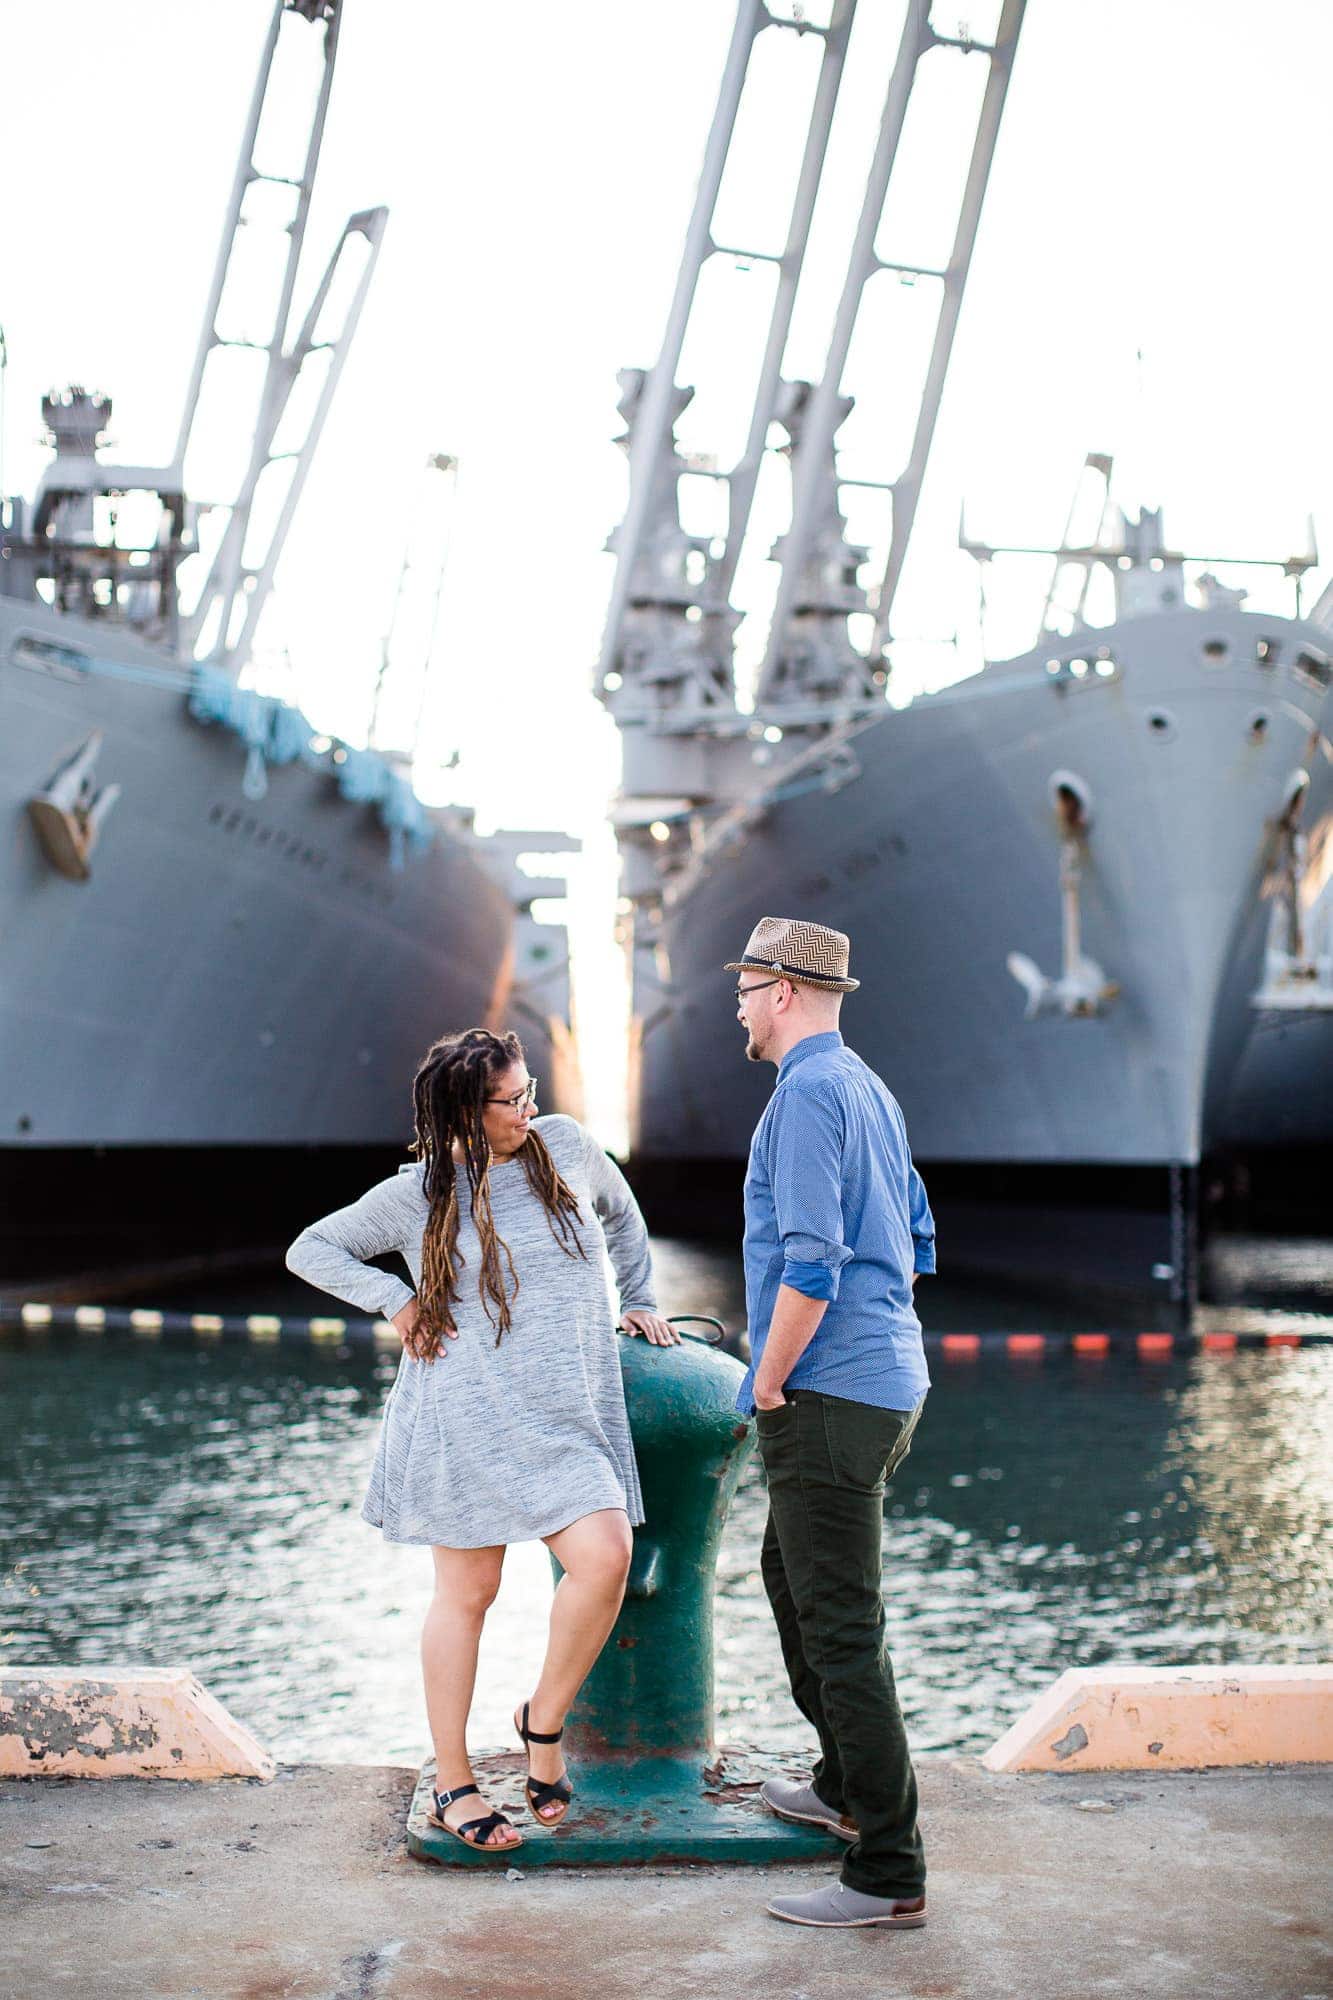 Couple looking at each other standing in front of two navy ships